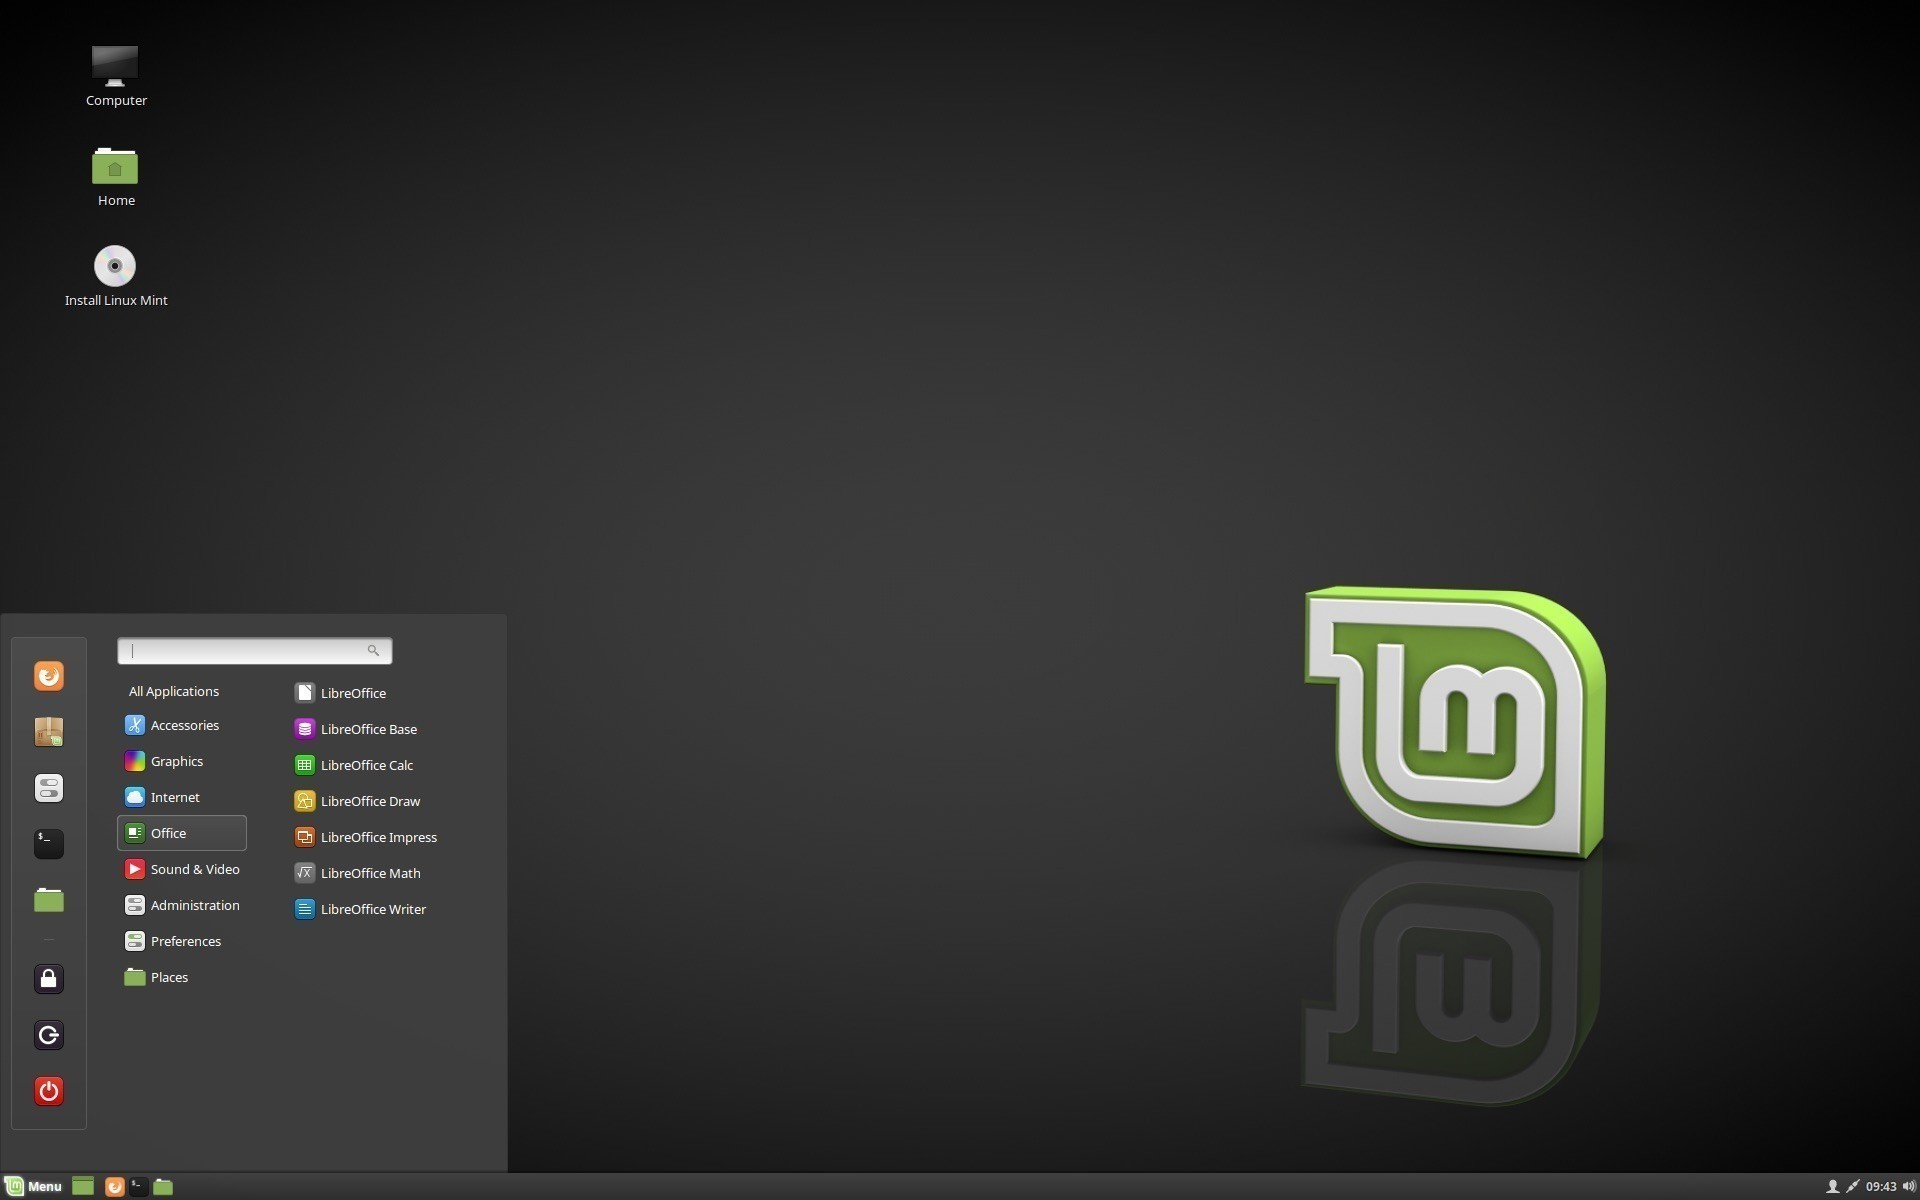 linux-mint-19-tara-won-t-collect-or-send-any-of-your-personal-or-system-data-520915-2.jpg